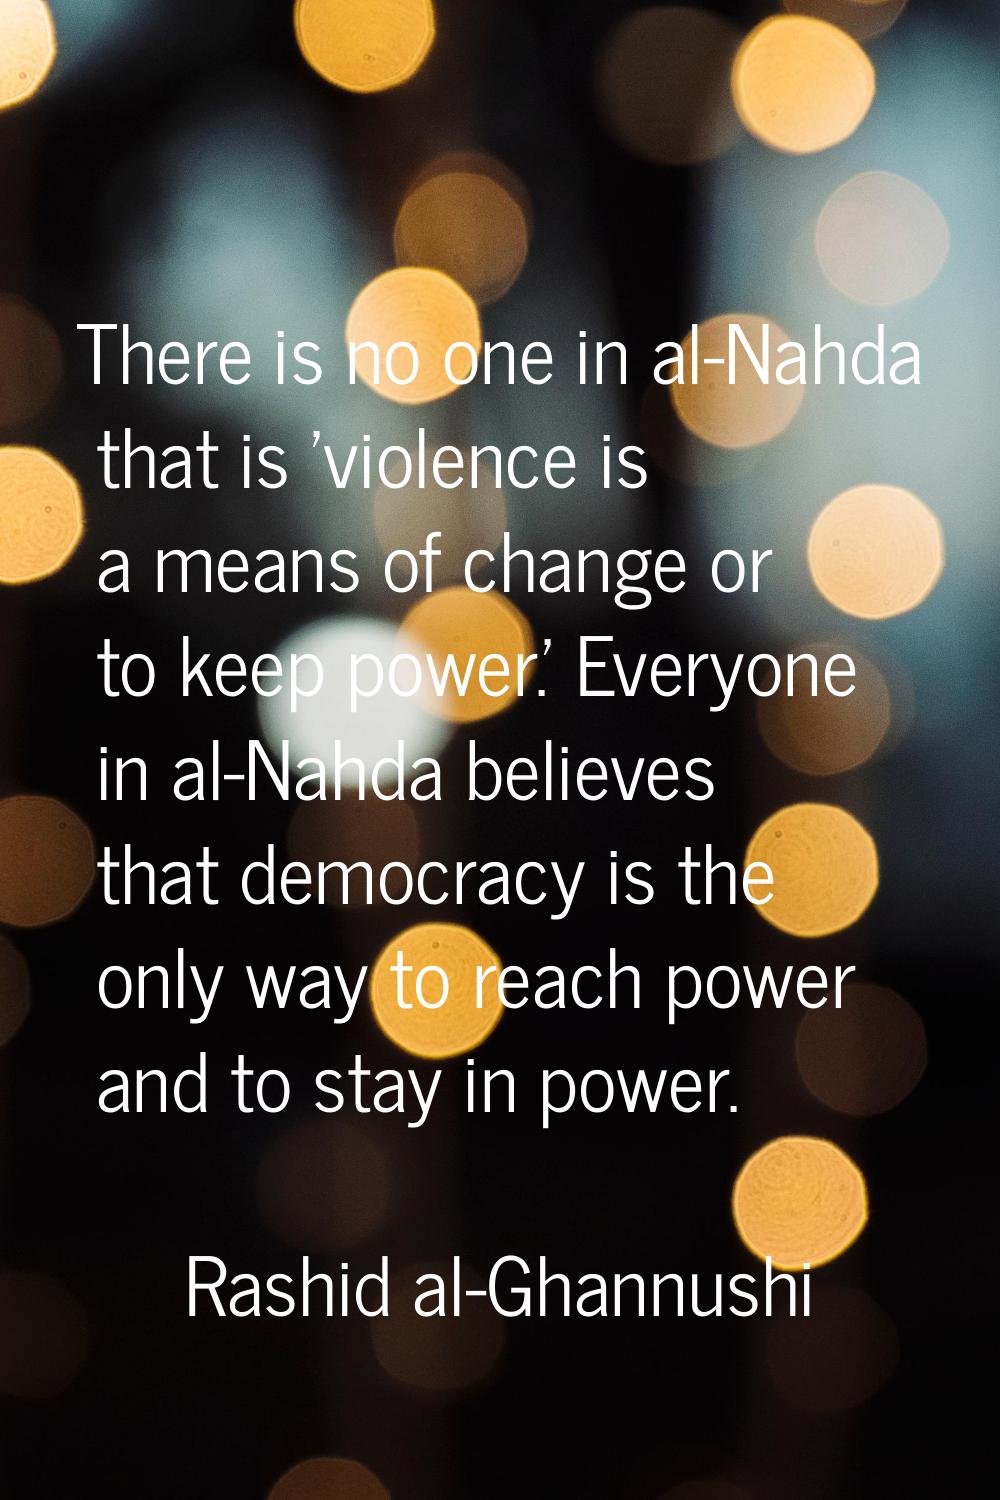 There is no one in al-Nahda that is 'violence is a means of change or to keep power.' Everyone in a